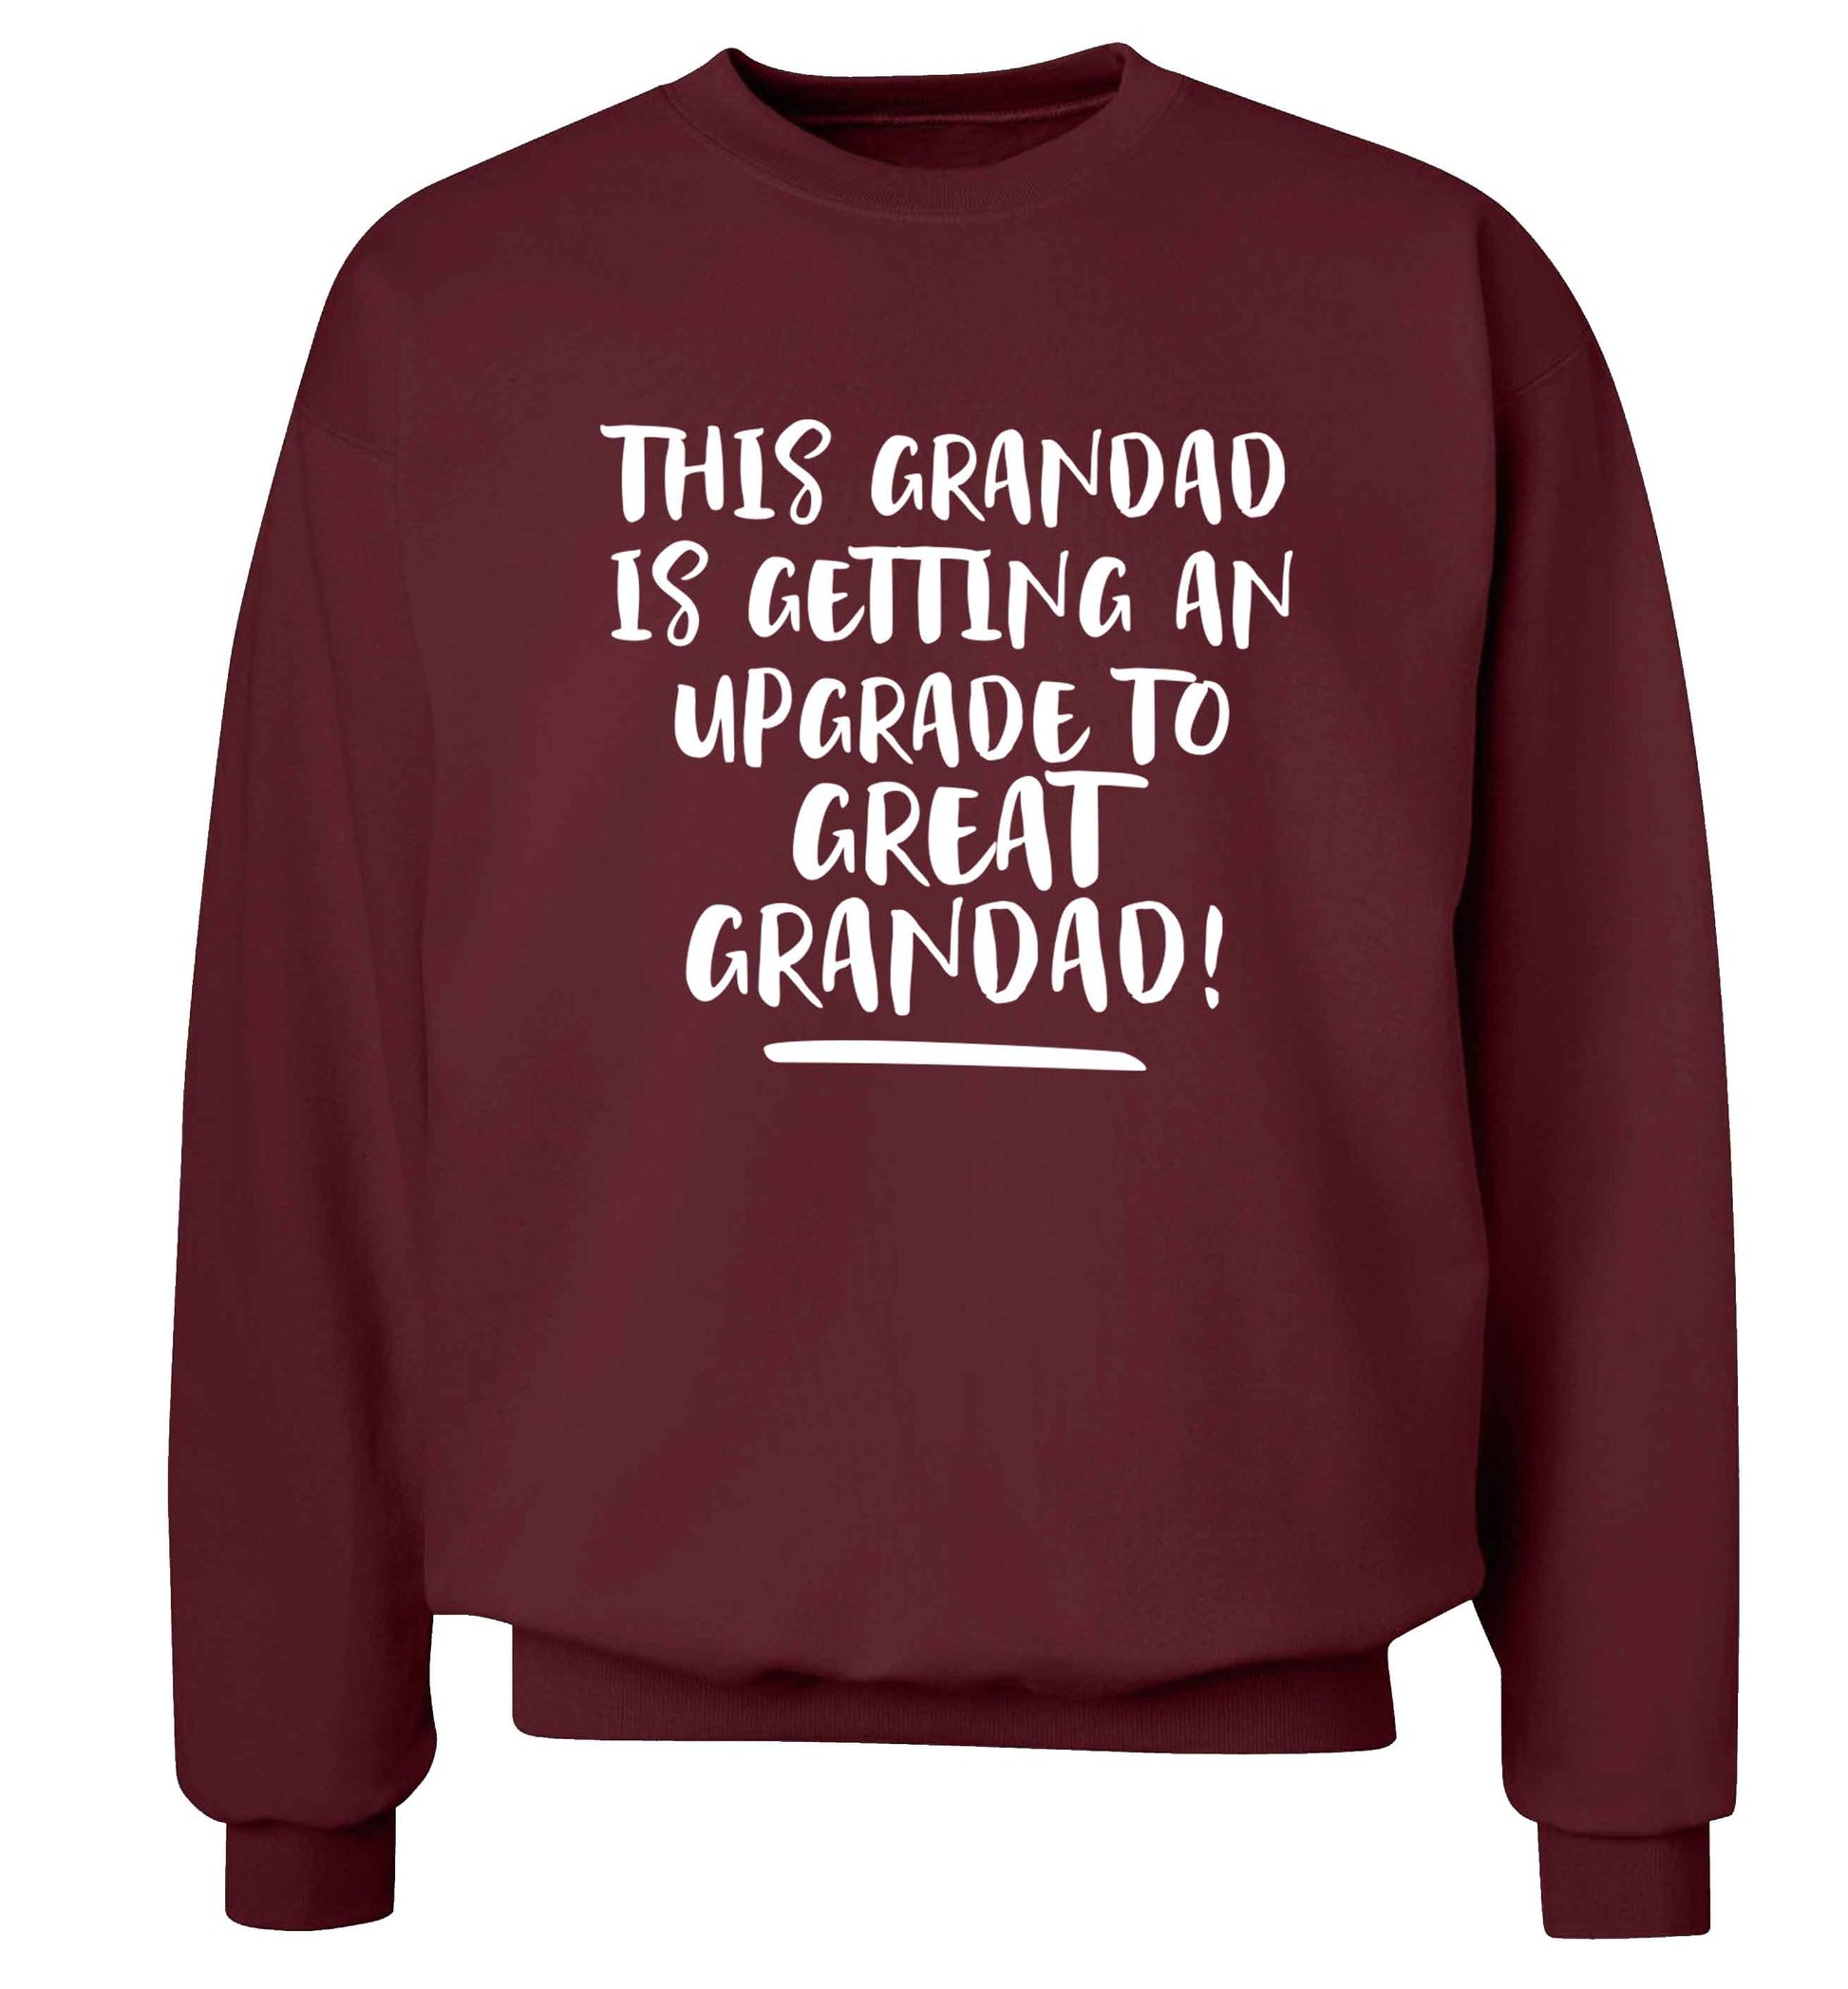 This grandad is getting an upgrade to great grandad! Adult's unisex maroon Sweater 2XL